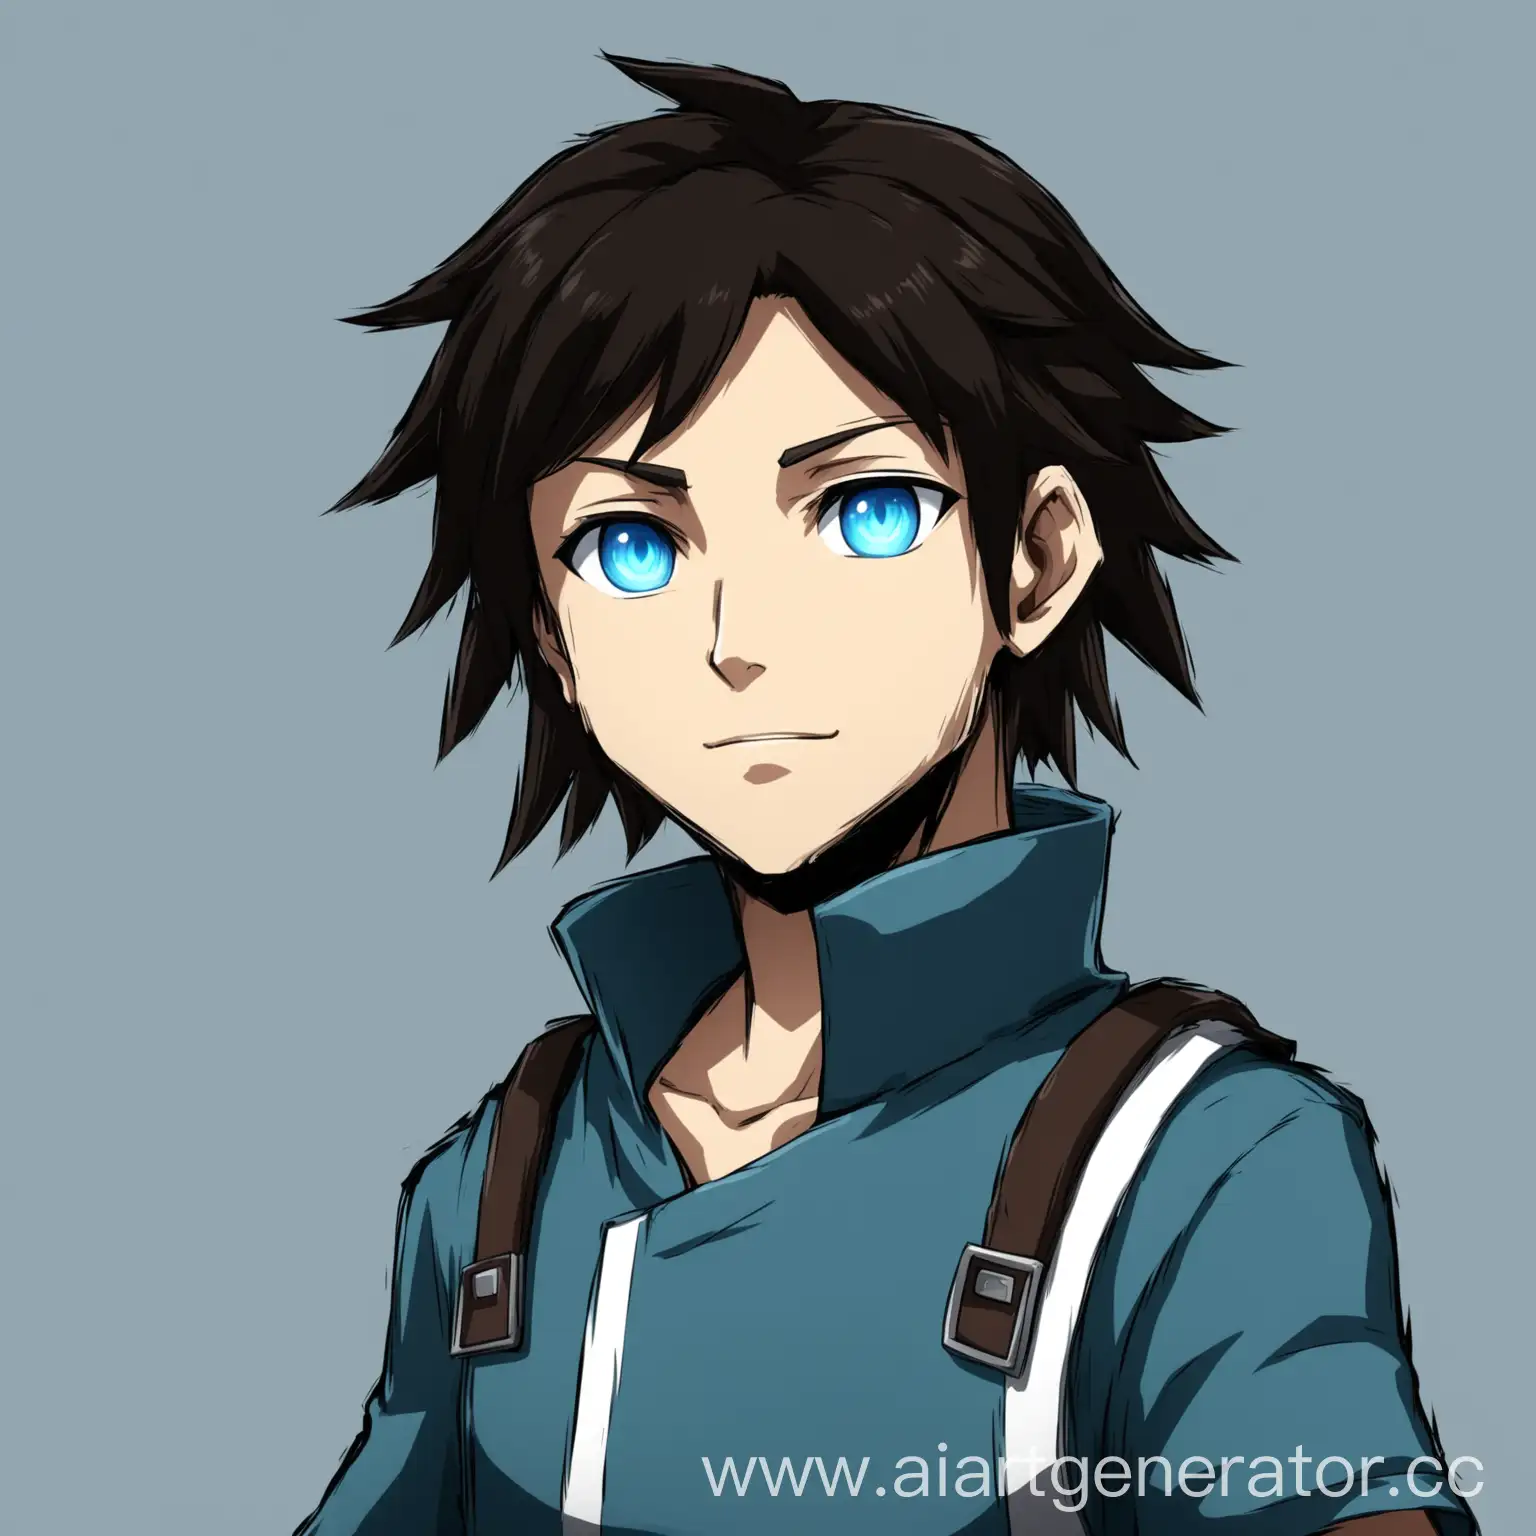 Anime-Style-Avatar-for-Game-Cute-Character-Design-with-Vibrant-Colors-and-Playful-Expression